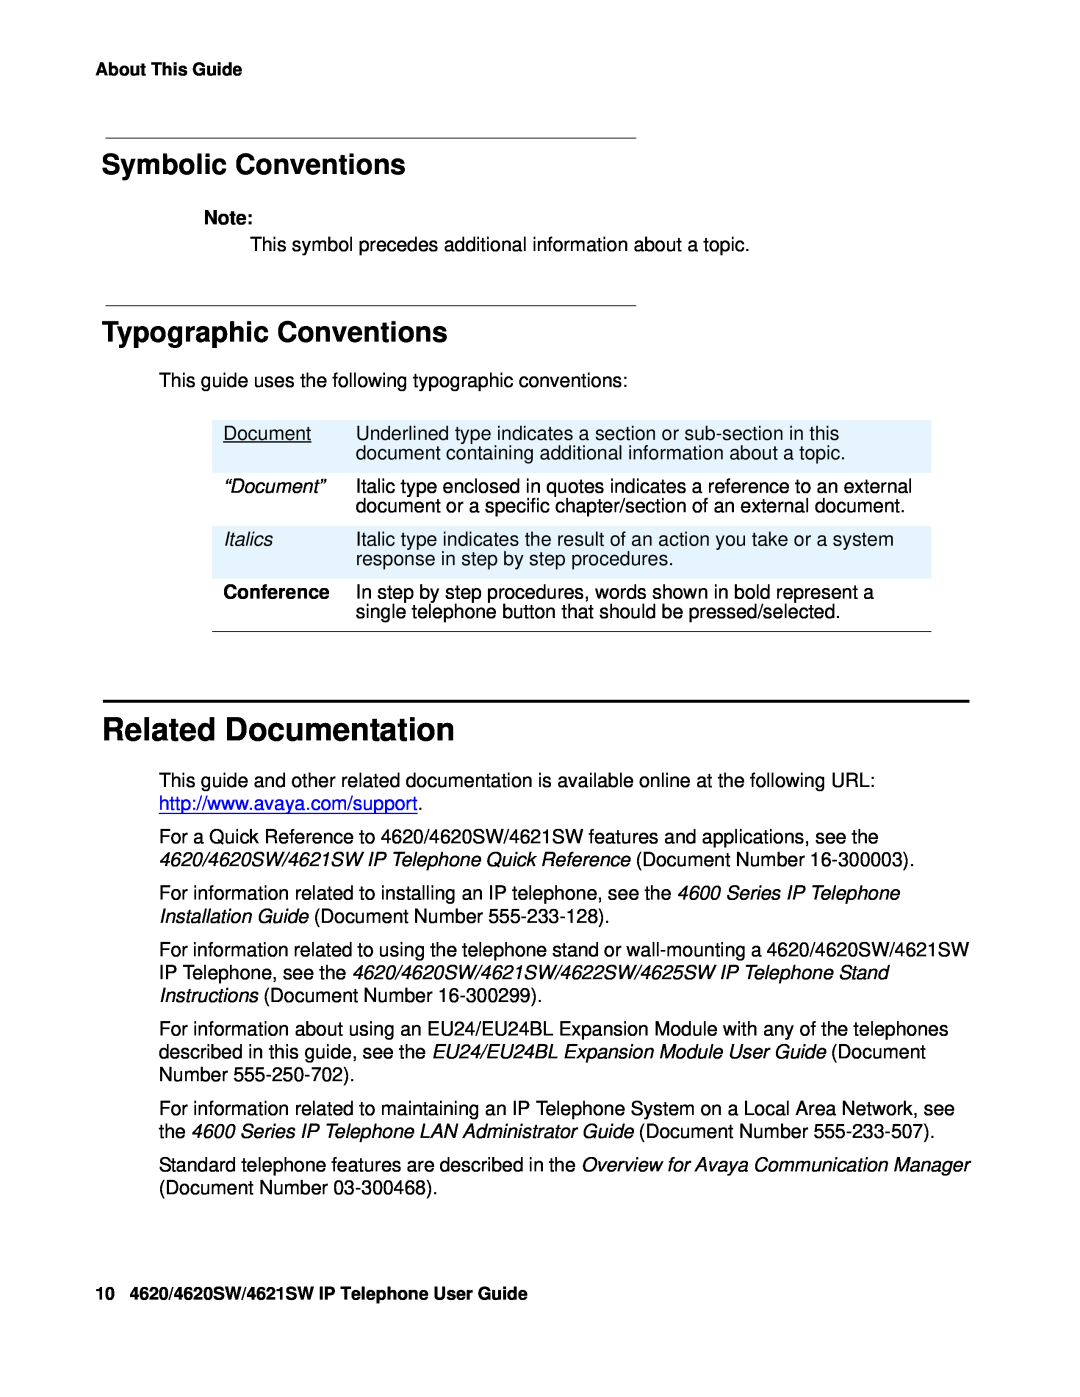 Avaya 4620SW, 4621SW manual Related Documentation, Symbolic Conventions, Typographic Conventions 